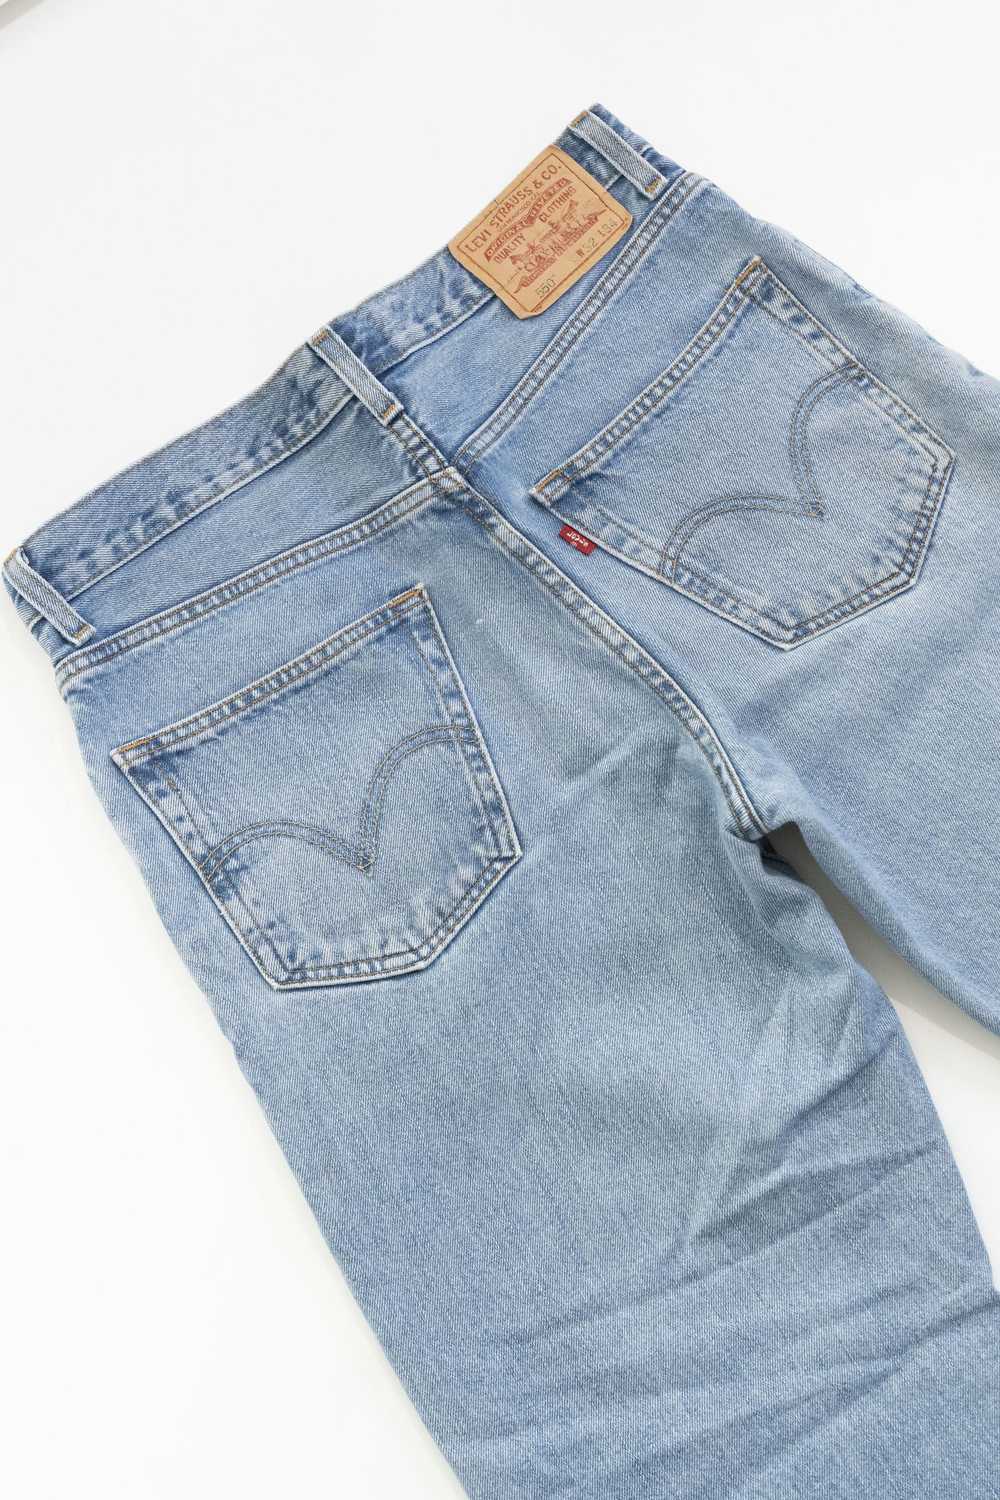 Levi's × Streetwear Levi's 550 Relaxed Fit jeans - image 1